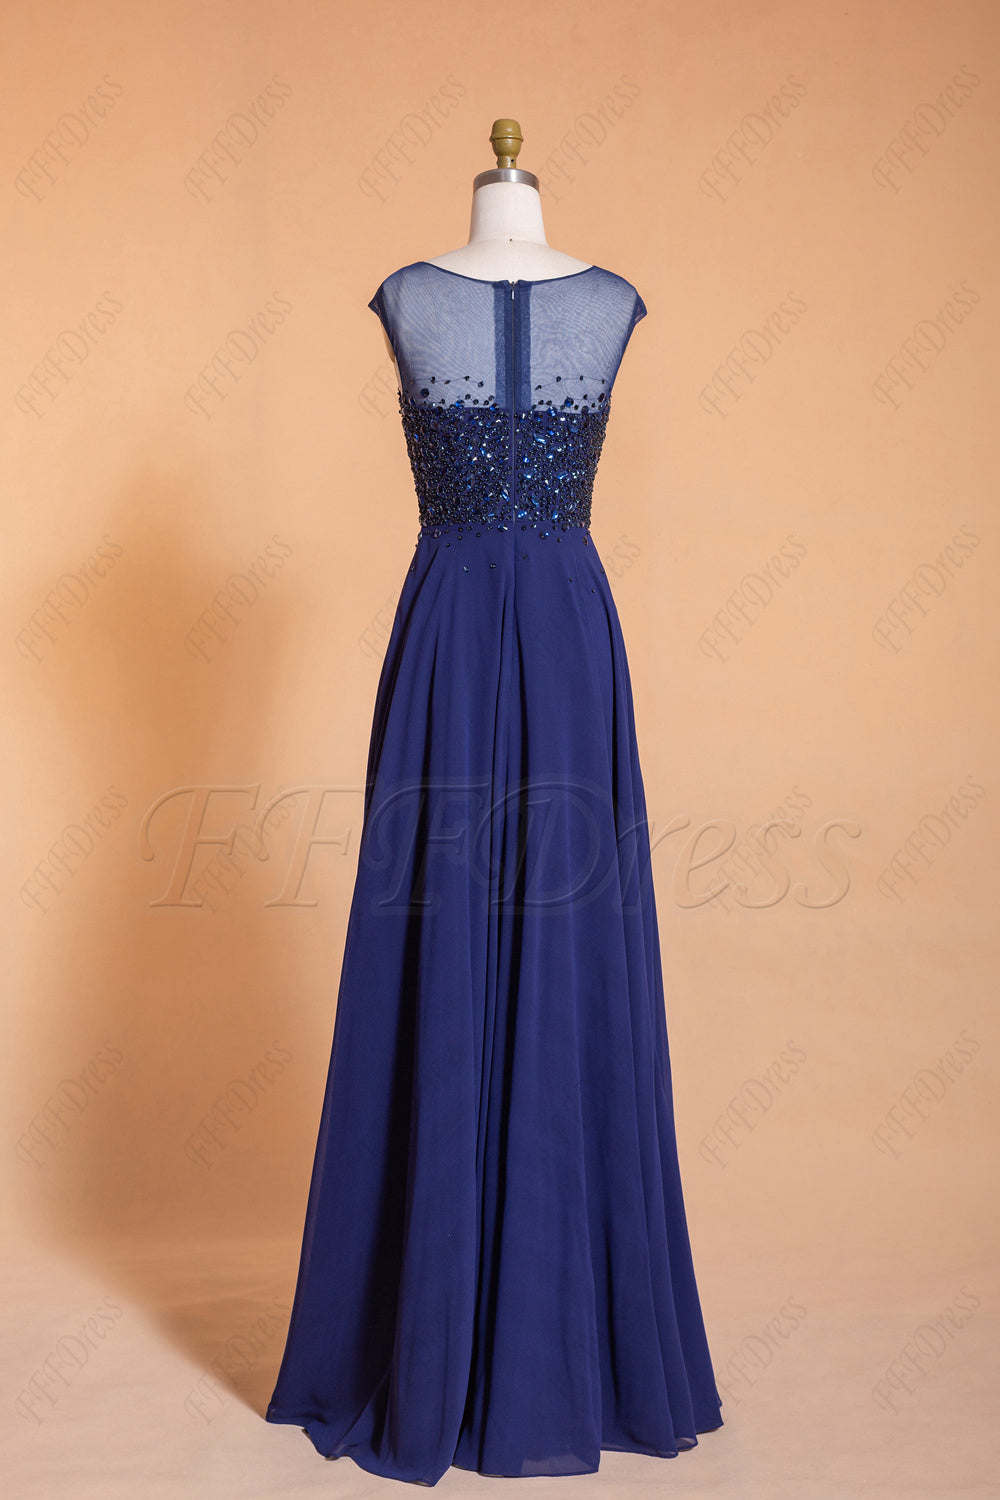 Beaded Modest Sparkly Navy Prom Dresses Long Cap Sleeves